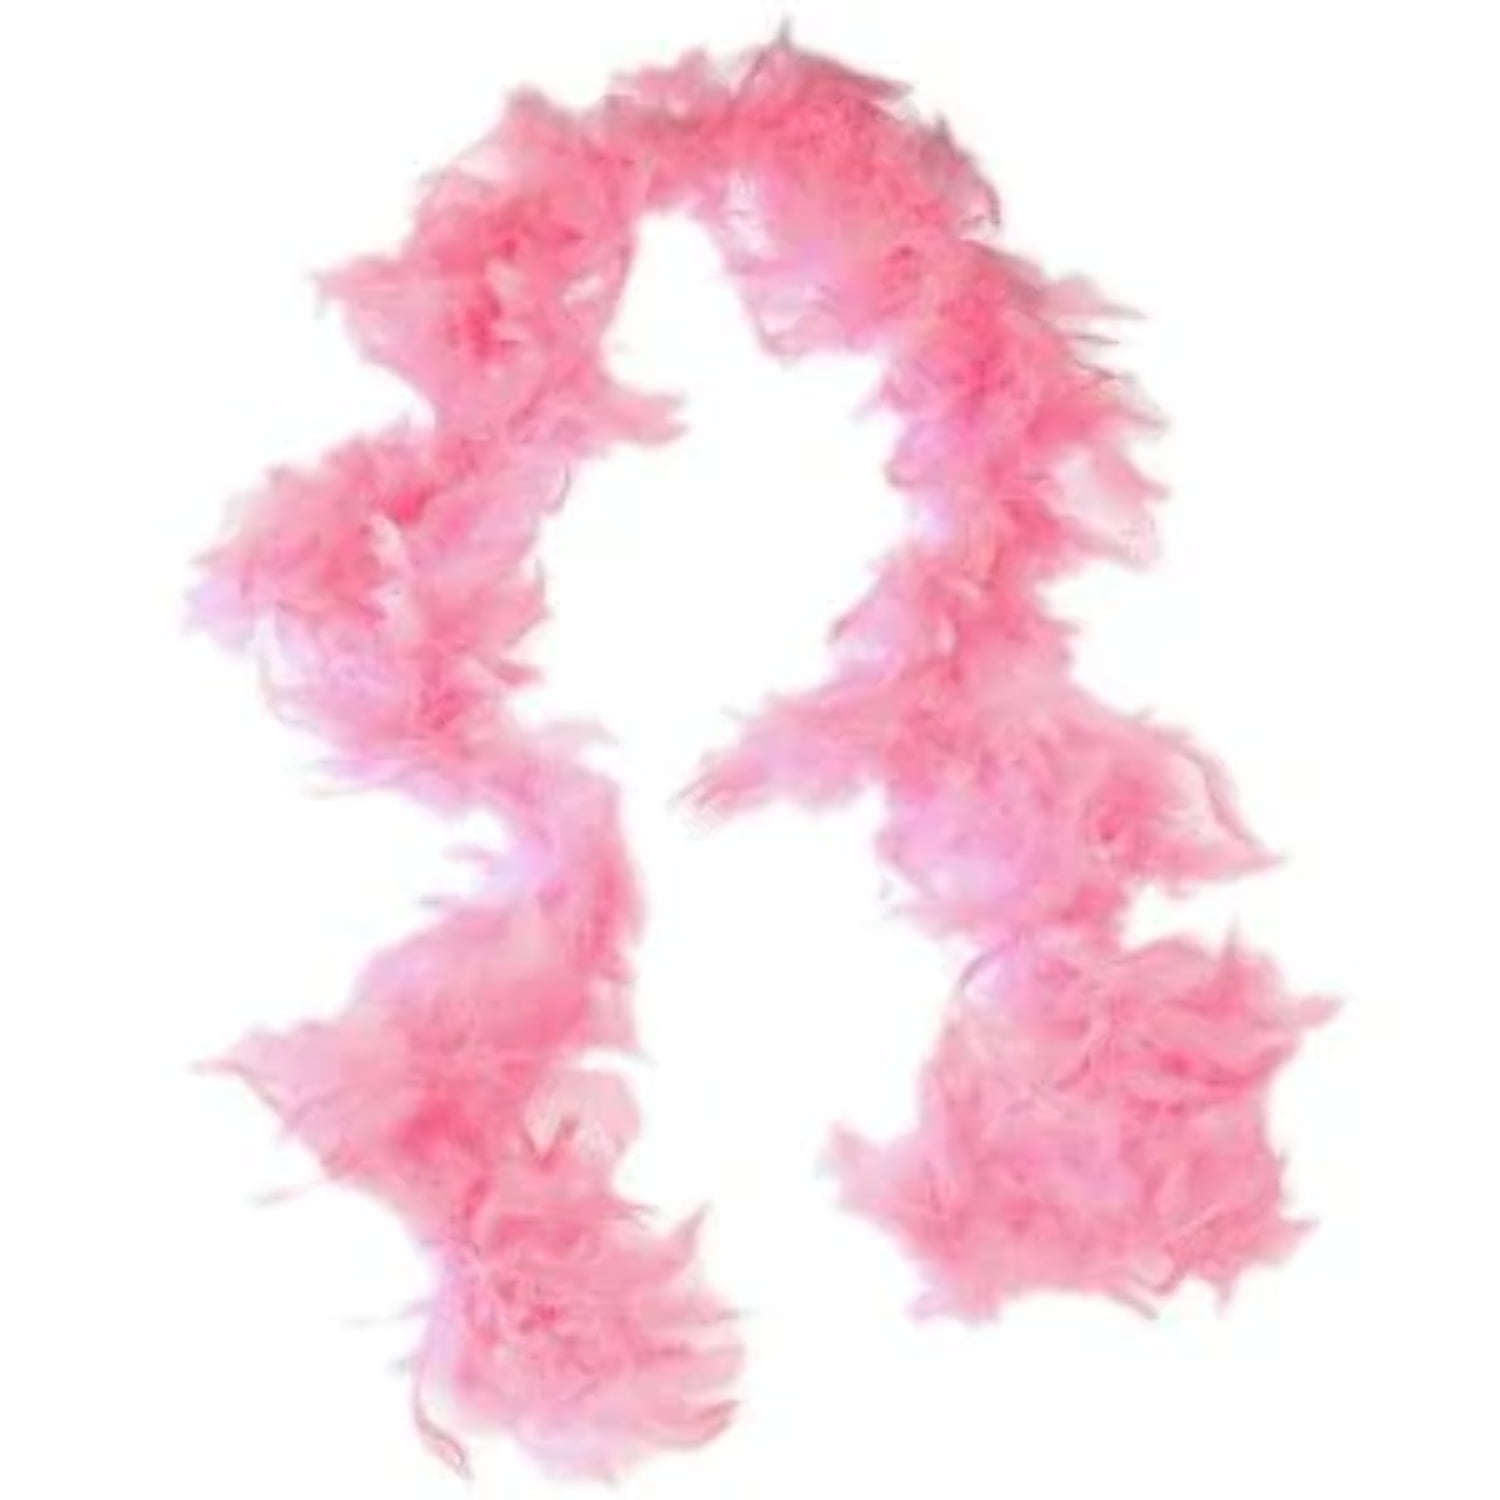 6.56ft White Feather Boa for Christmas Tree Decoration, Feather Garland Craft Holiday Wedding Party Christmas Decor, Adult Unisex, Size: 2m/6.56ft